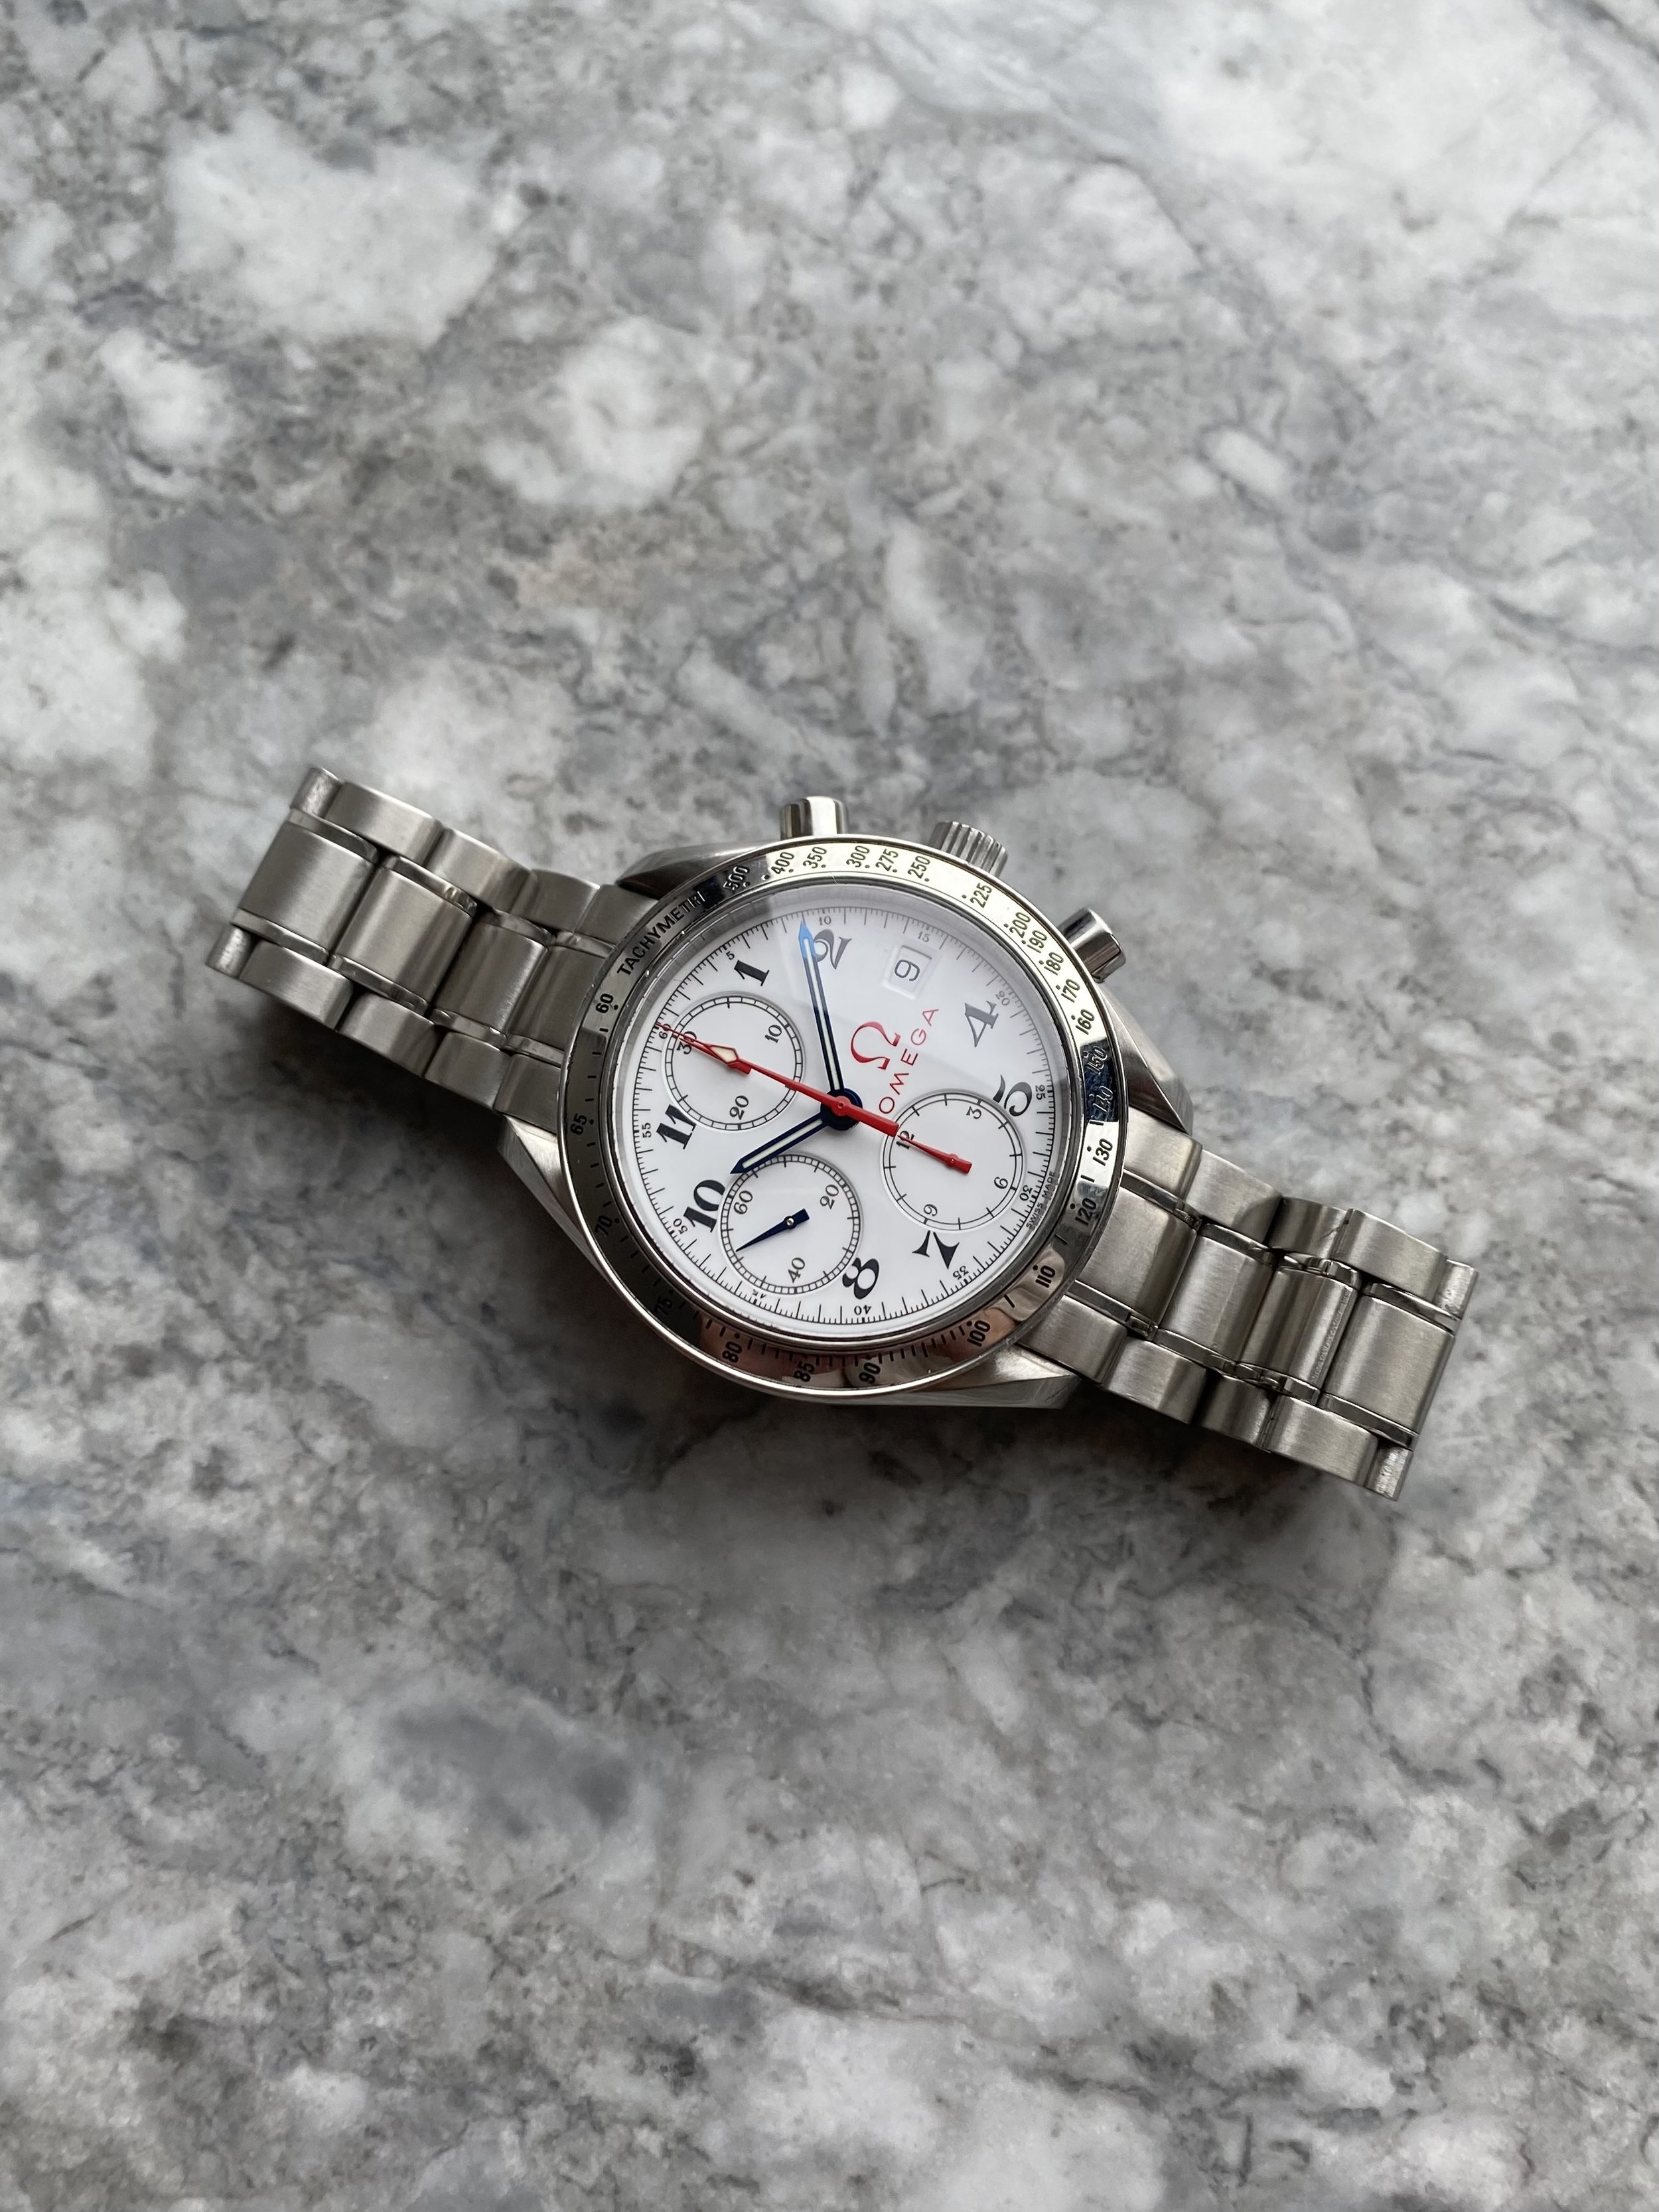 Omega Speedmaster - Olympics White Dial. — Danny's Vintage Watches